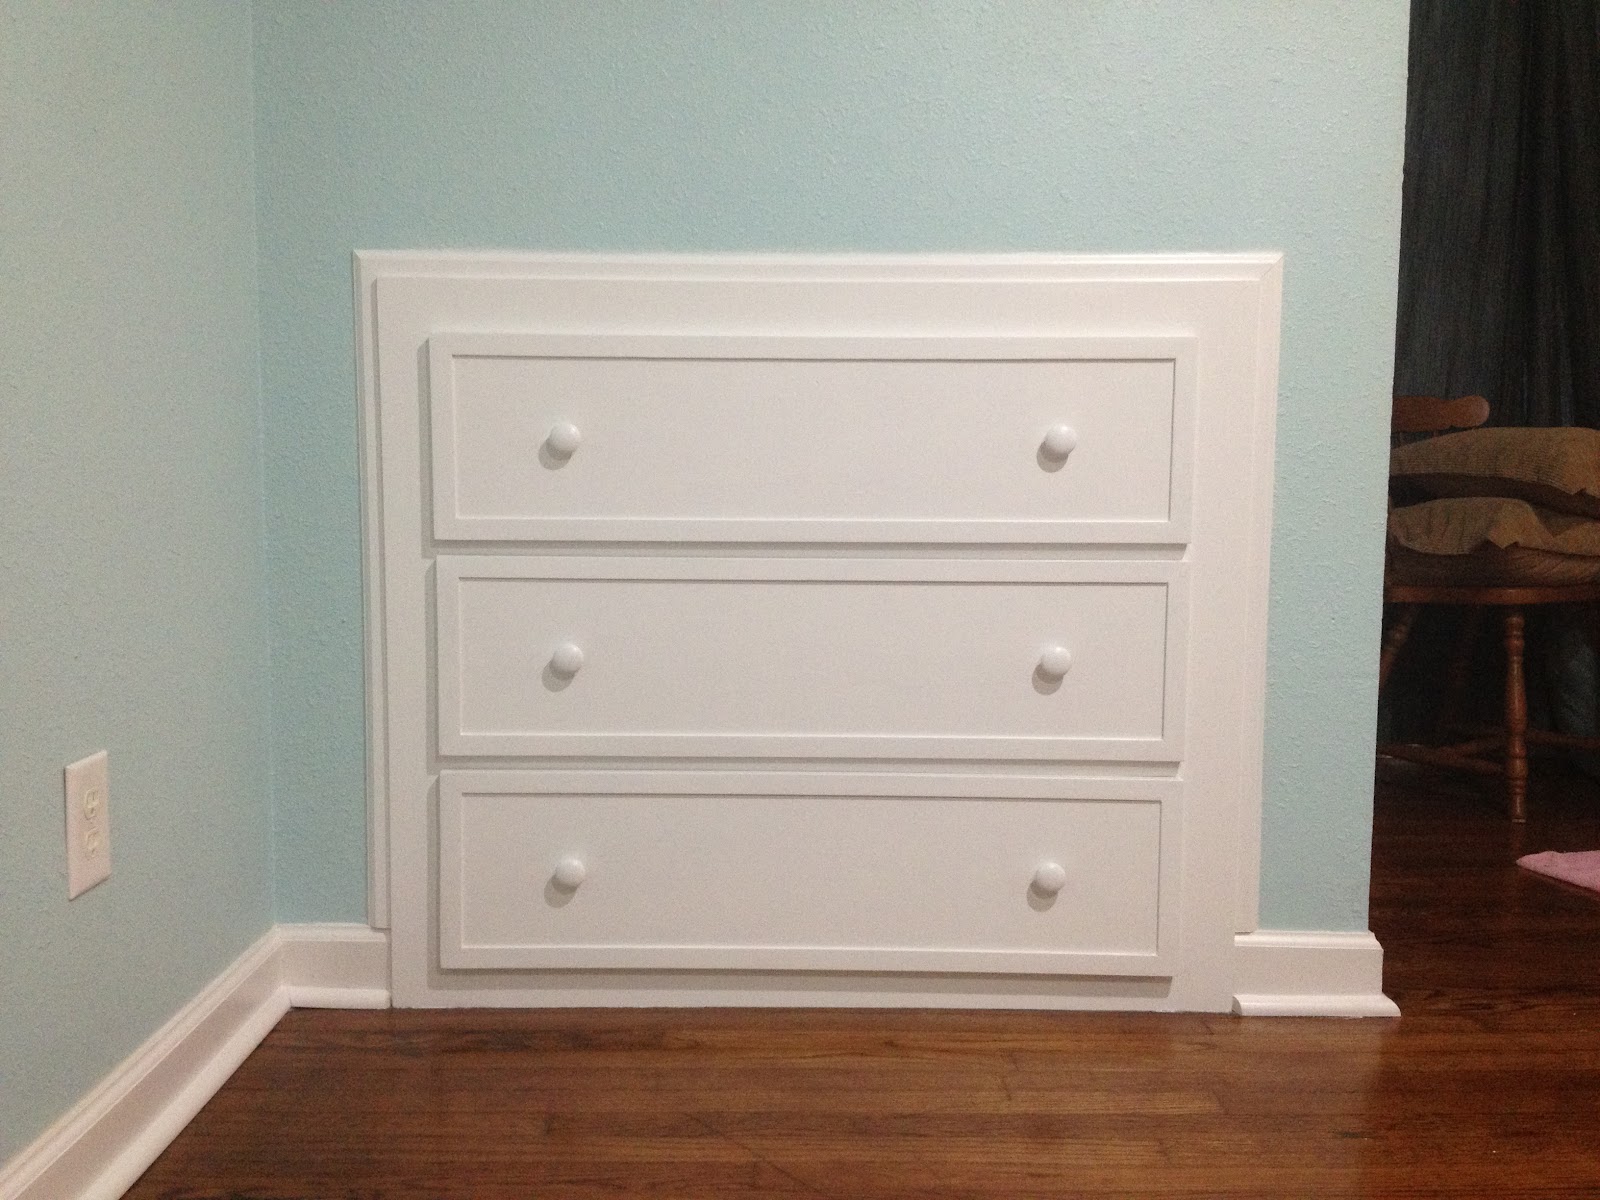 How to Build How To Build Dresser Into Wall PDF Plans